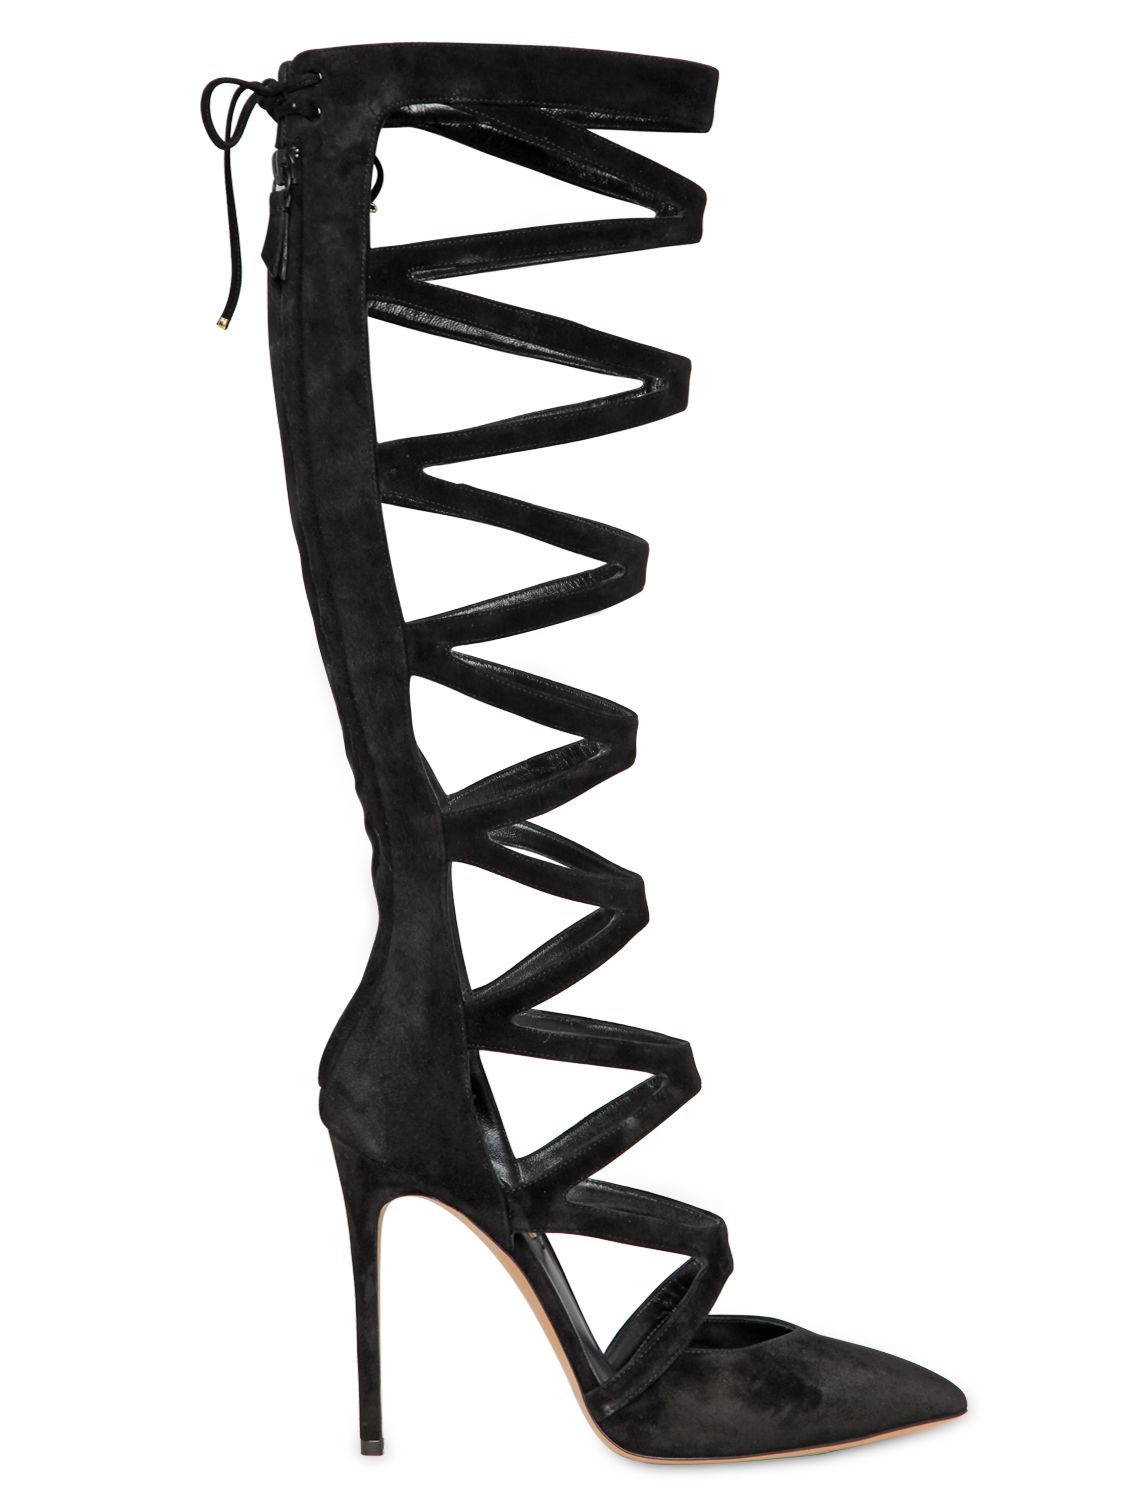 Casadei 120Mm Suede Cage Boots in Black - Lyst